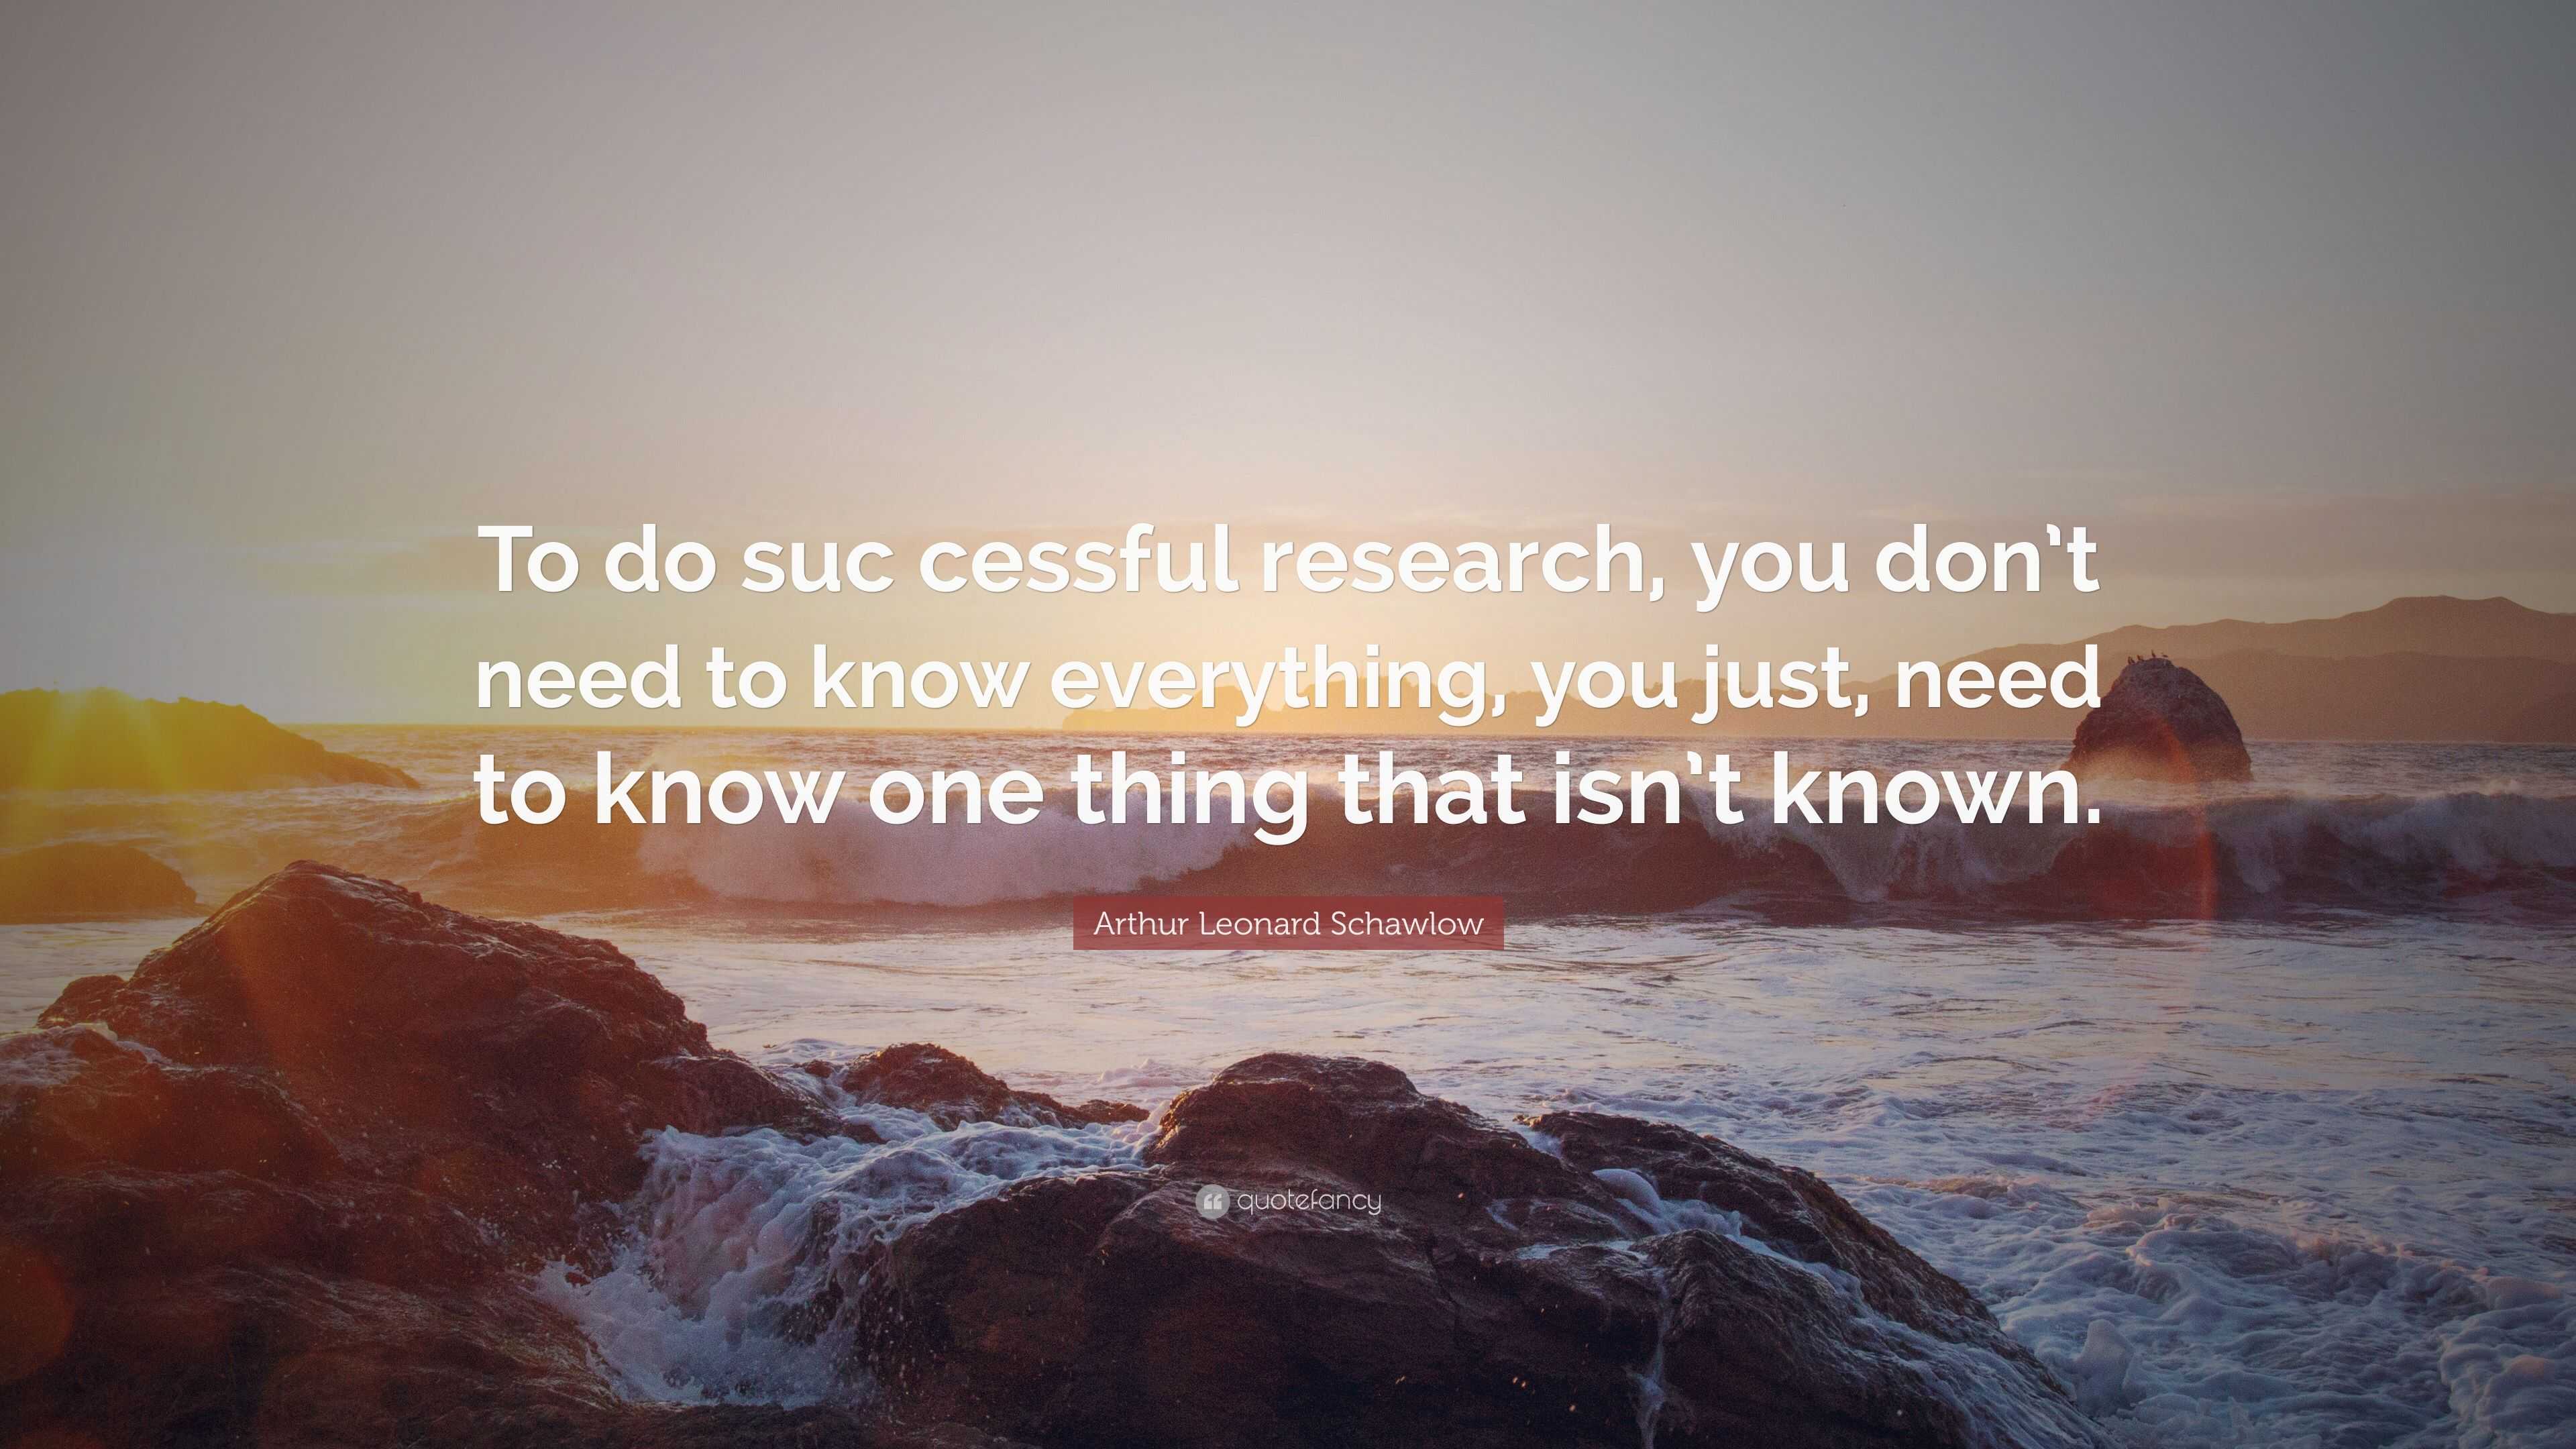 Arthur Leonard Schawlow Quote: “To do suc cessful research, you don’t ...